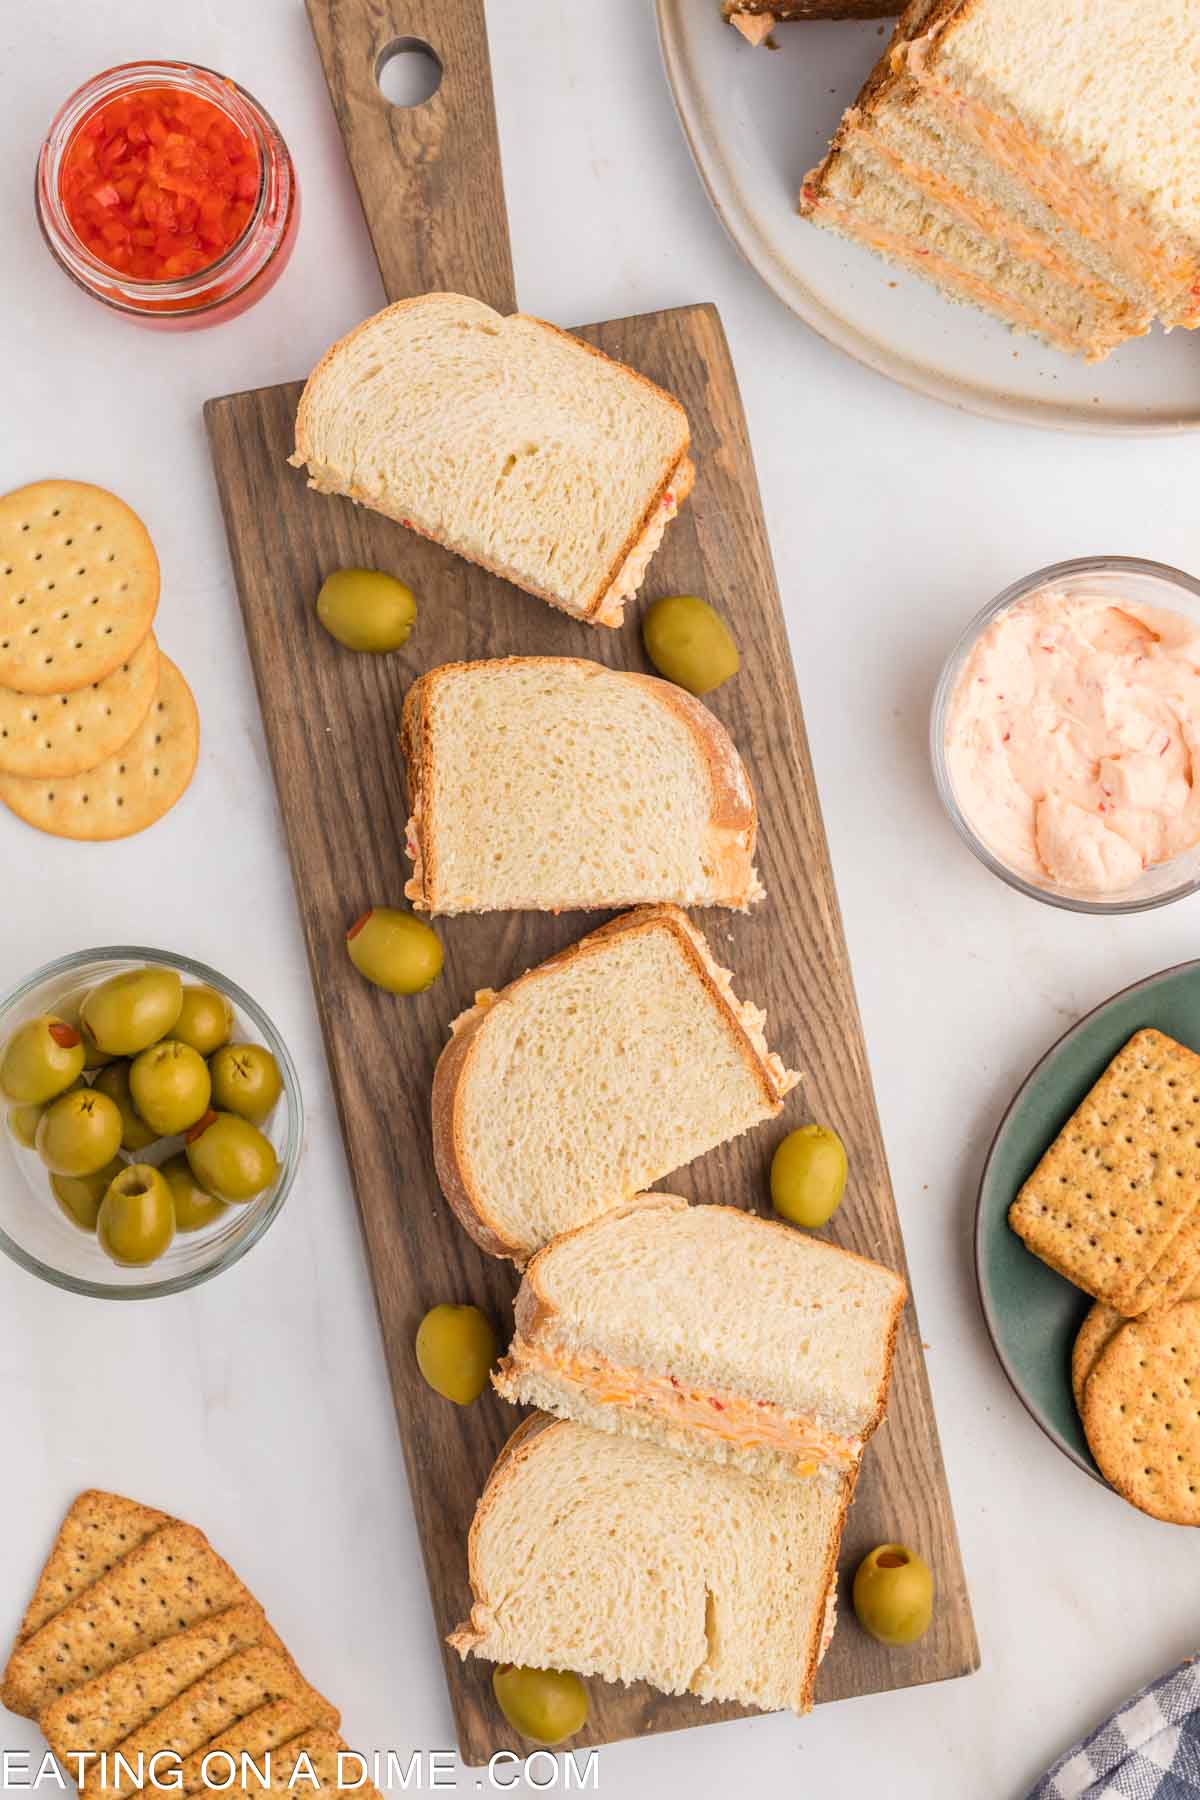 Pimento Cheese cut in half on a cutting board with bowls of green olives, crackers and pimento cheese